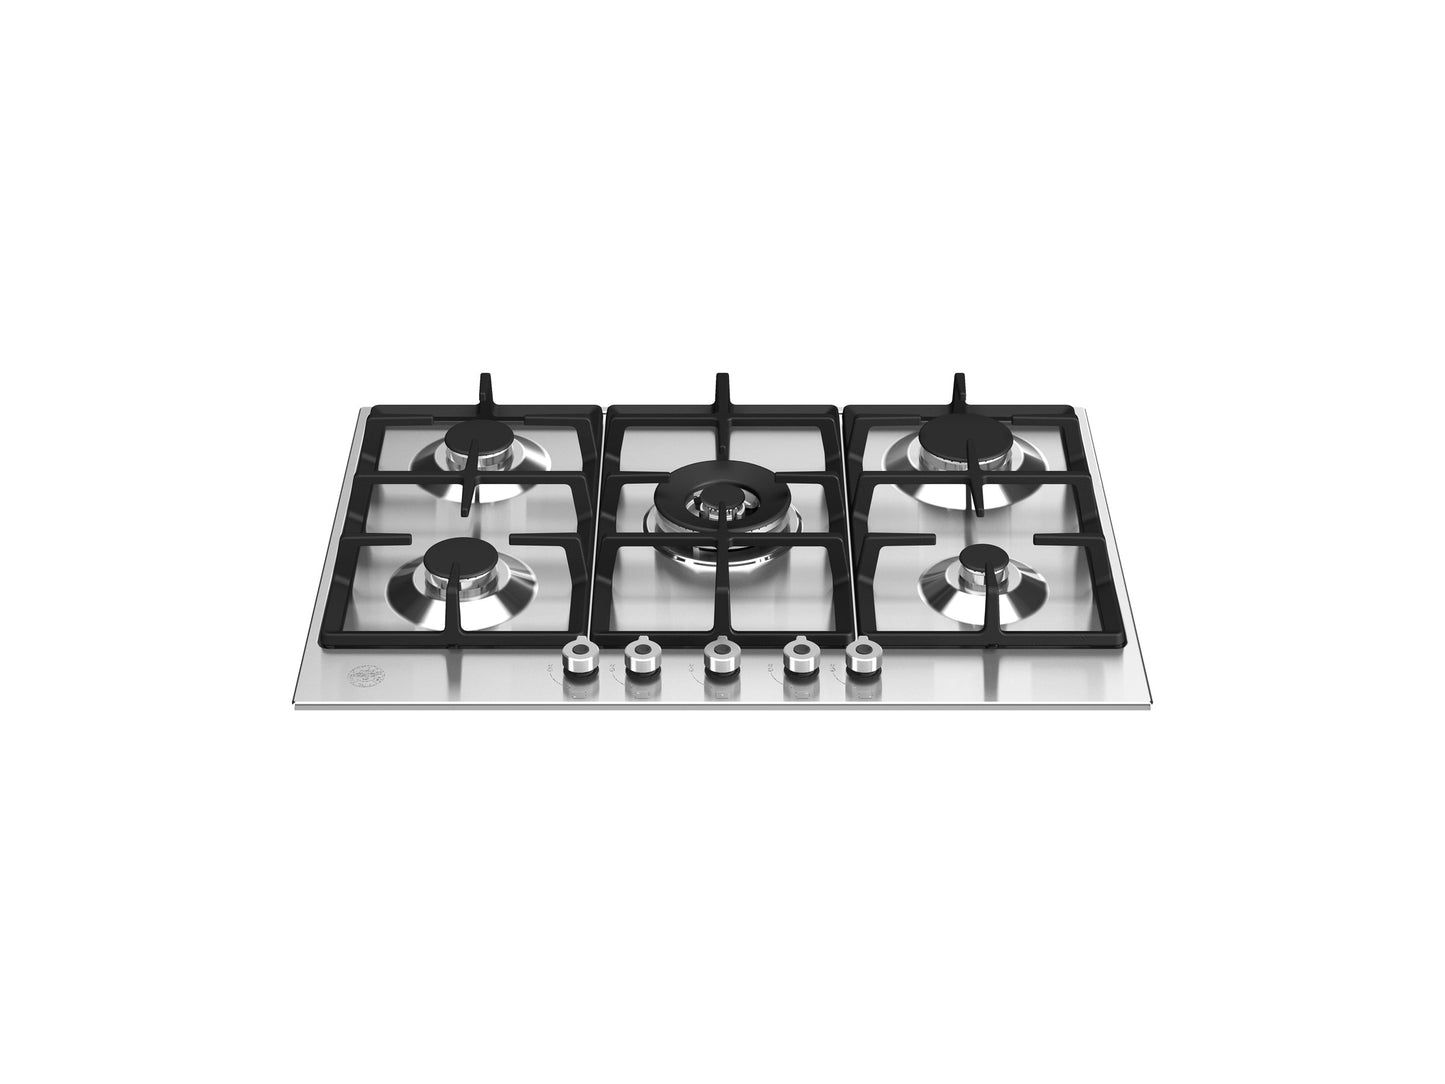 Bertazzoni Professional Series 30" 5 Aluminum Burners Stainless Steel Front Control Gas Cooktop